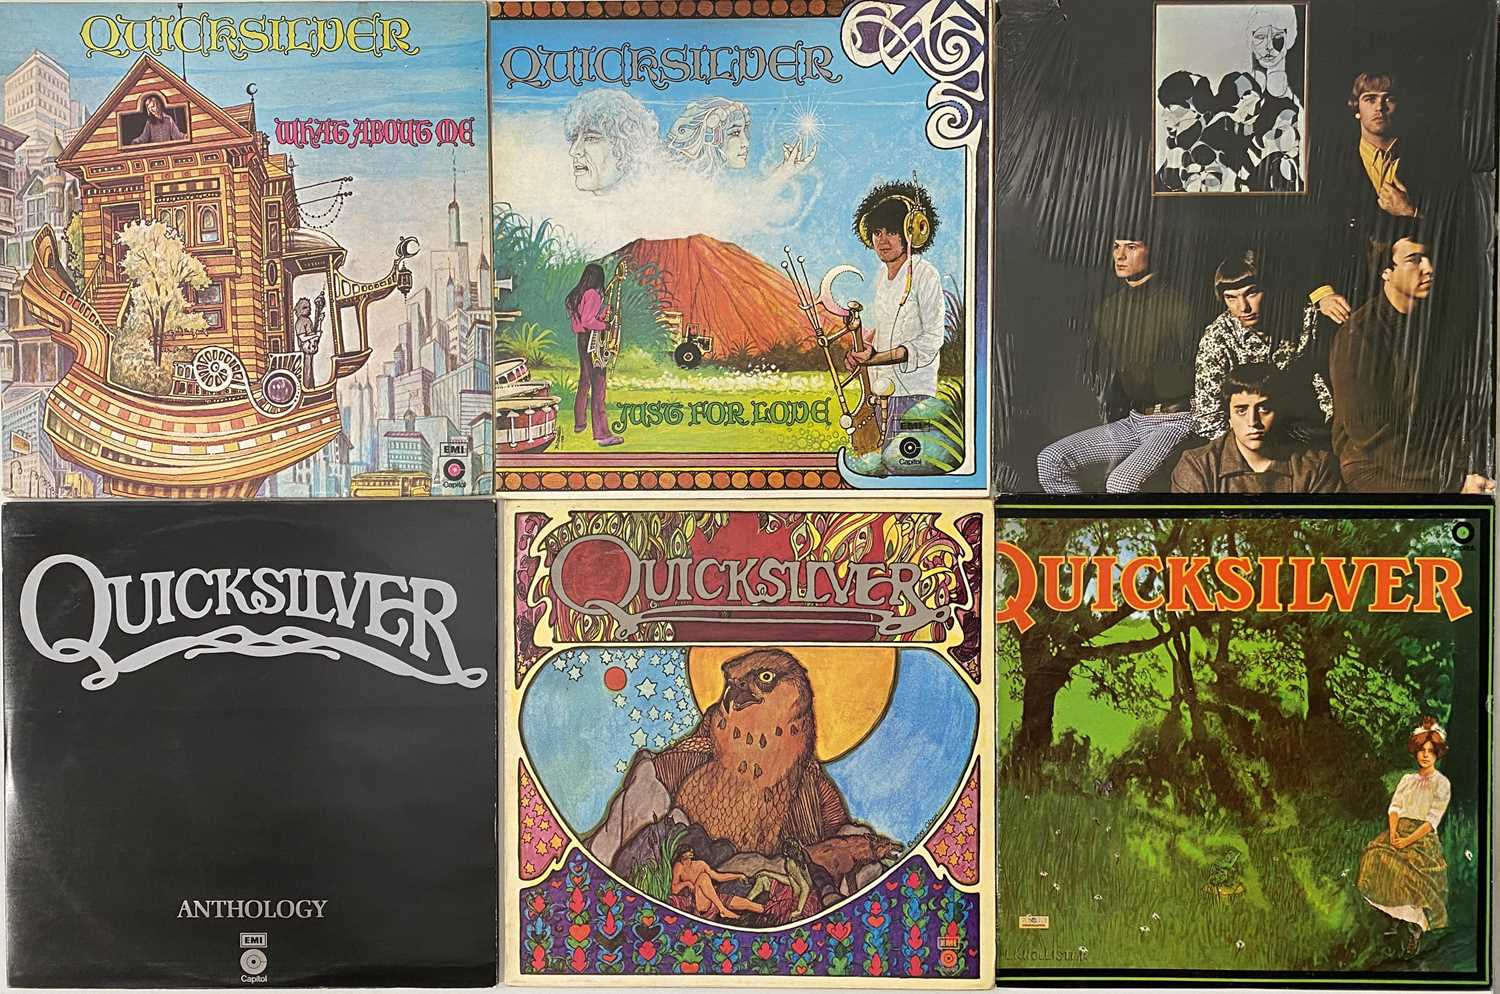 WEST COAST/ PSYCH - LP COLLECTION - Image 2 of 4